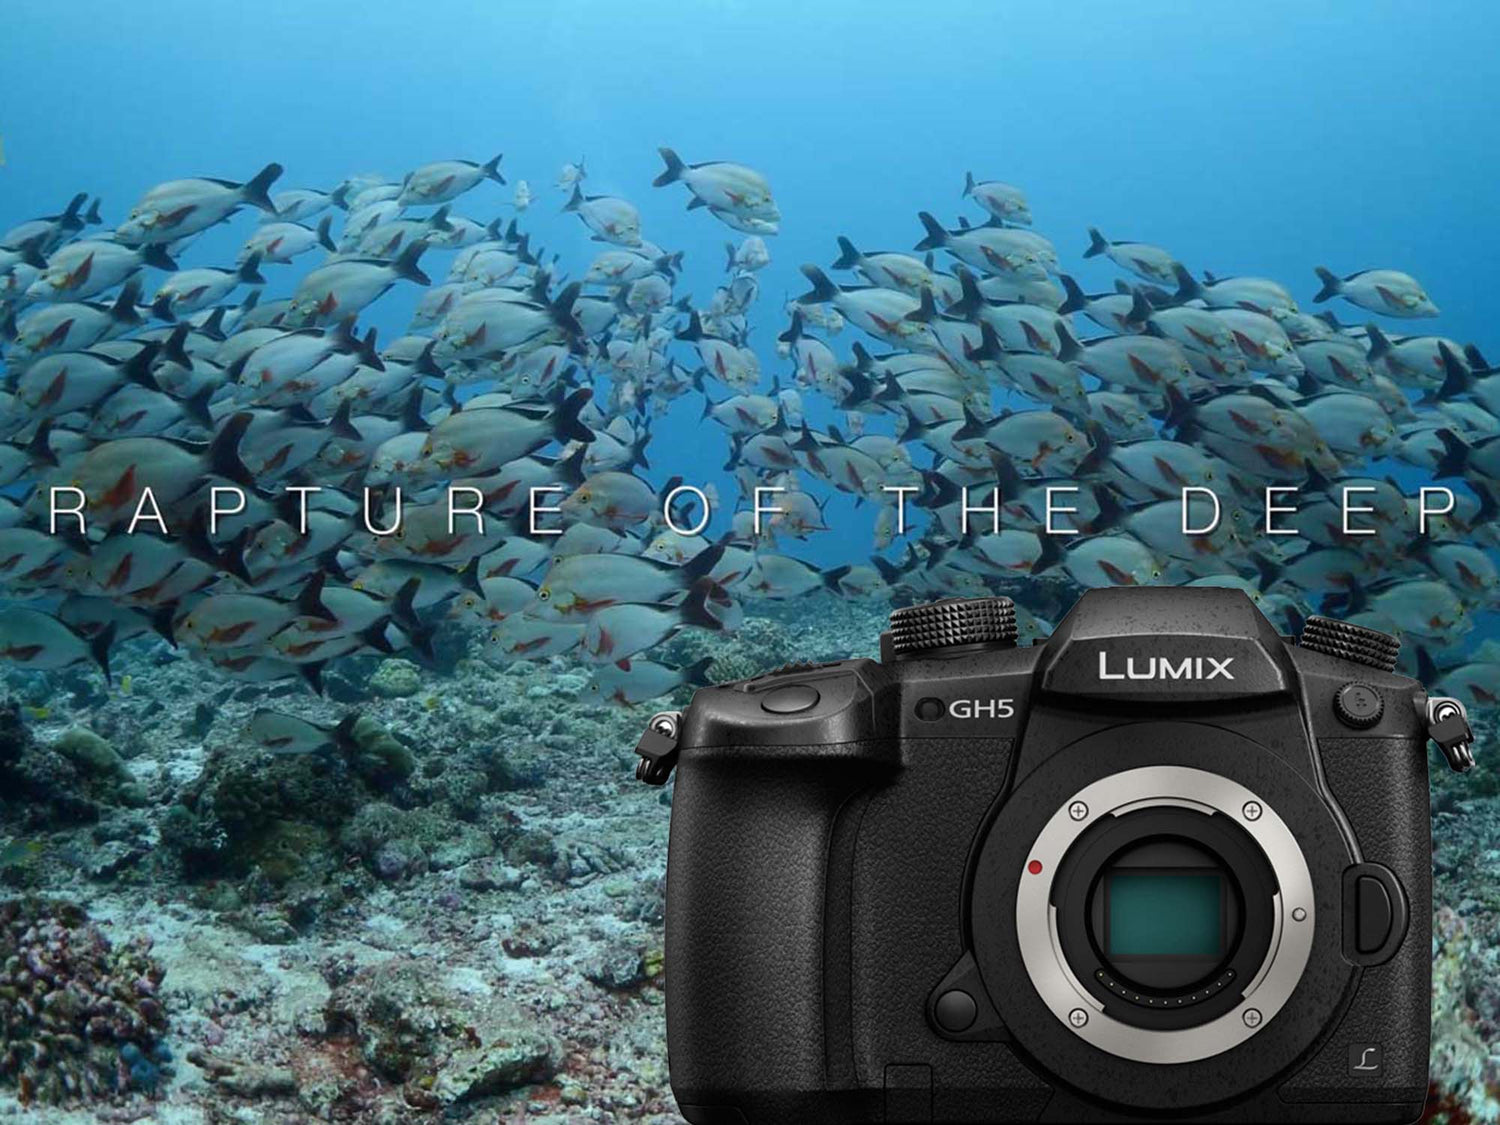 The Rapture of the Deep | Maldives with the Panasonic GH5 [VIDEO]